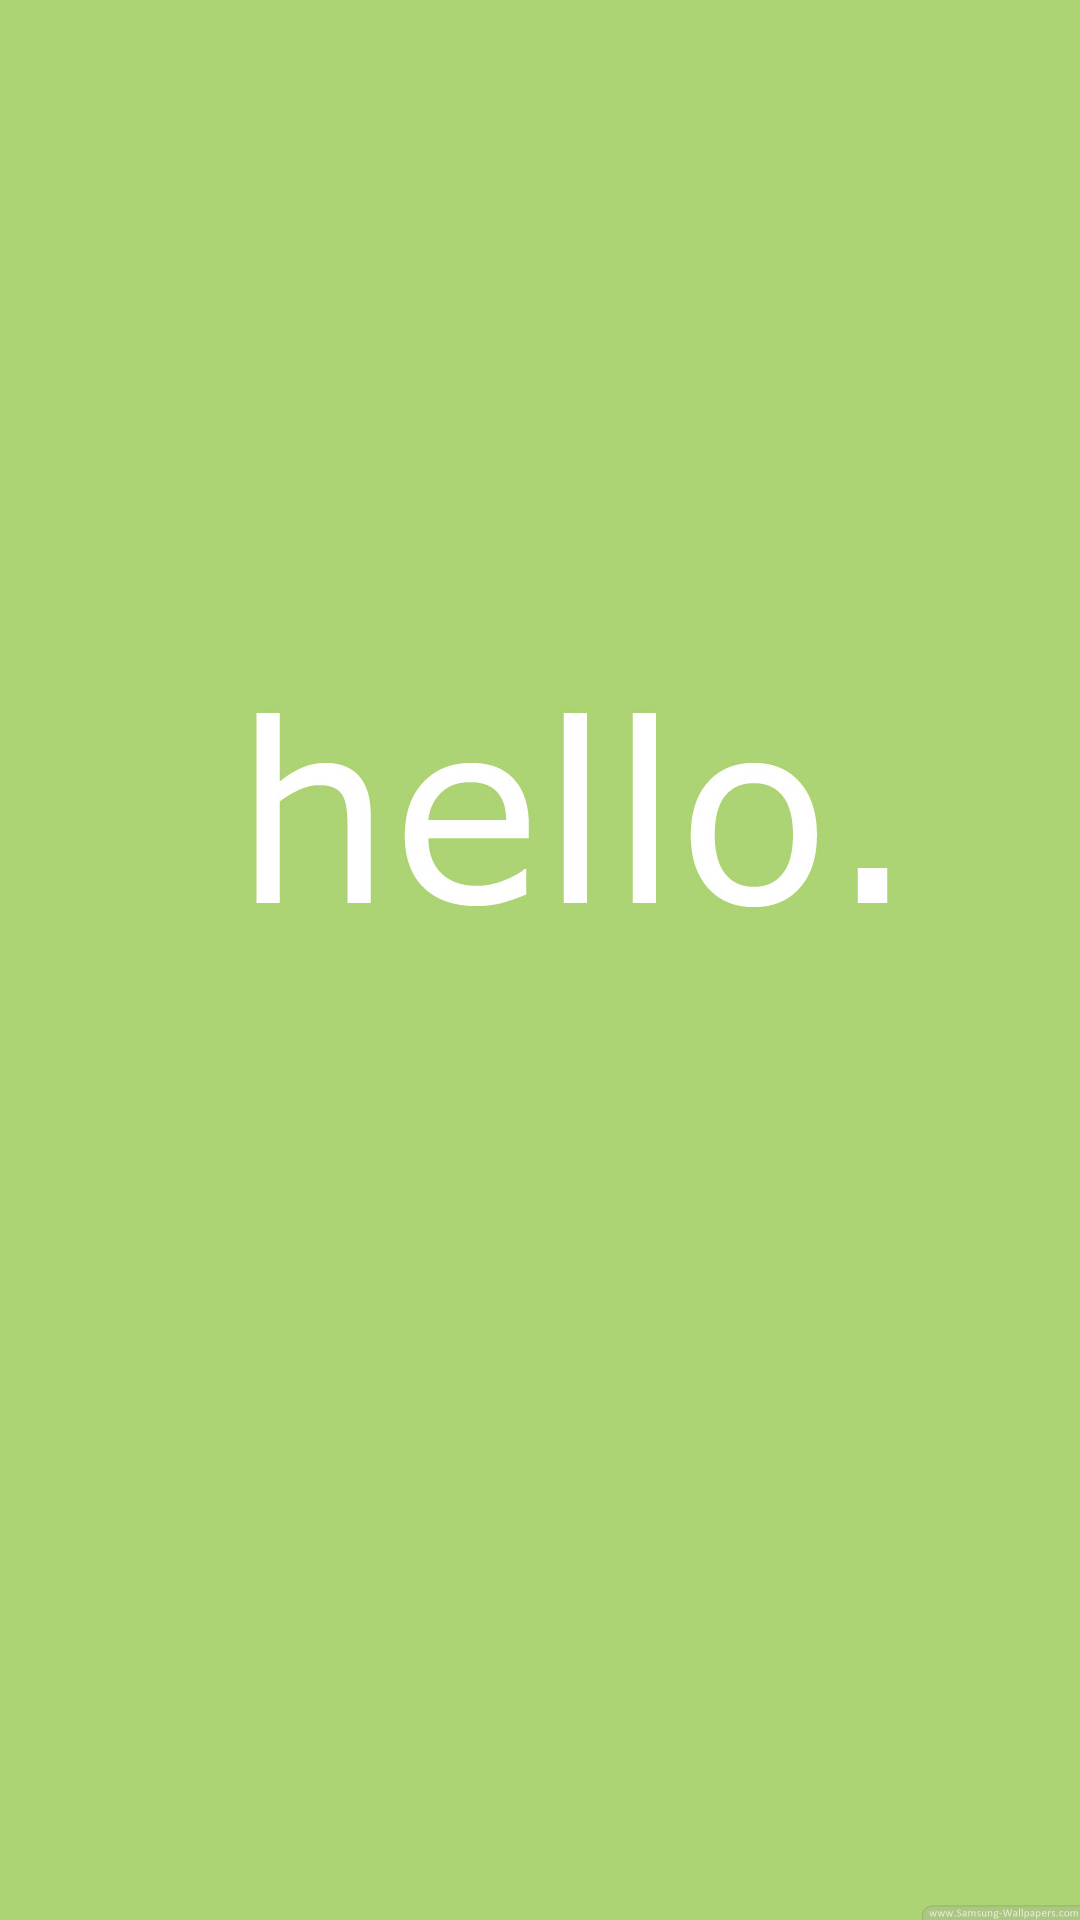 Cute Simple Hello Message Android Wallpaper Free Download - Resimkoy